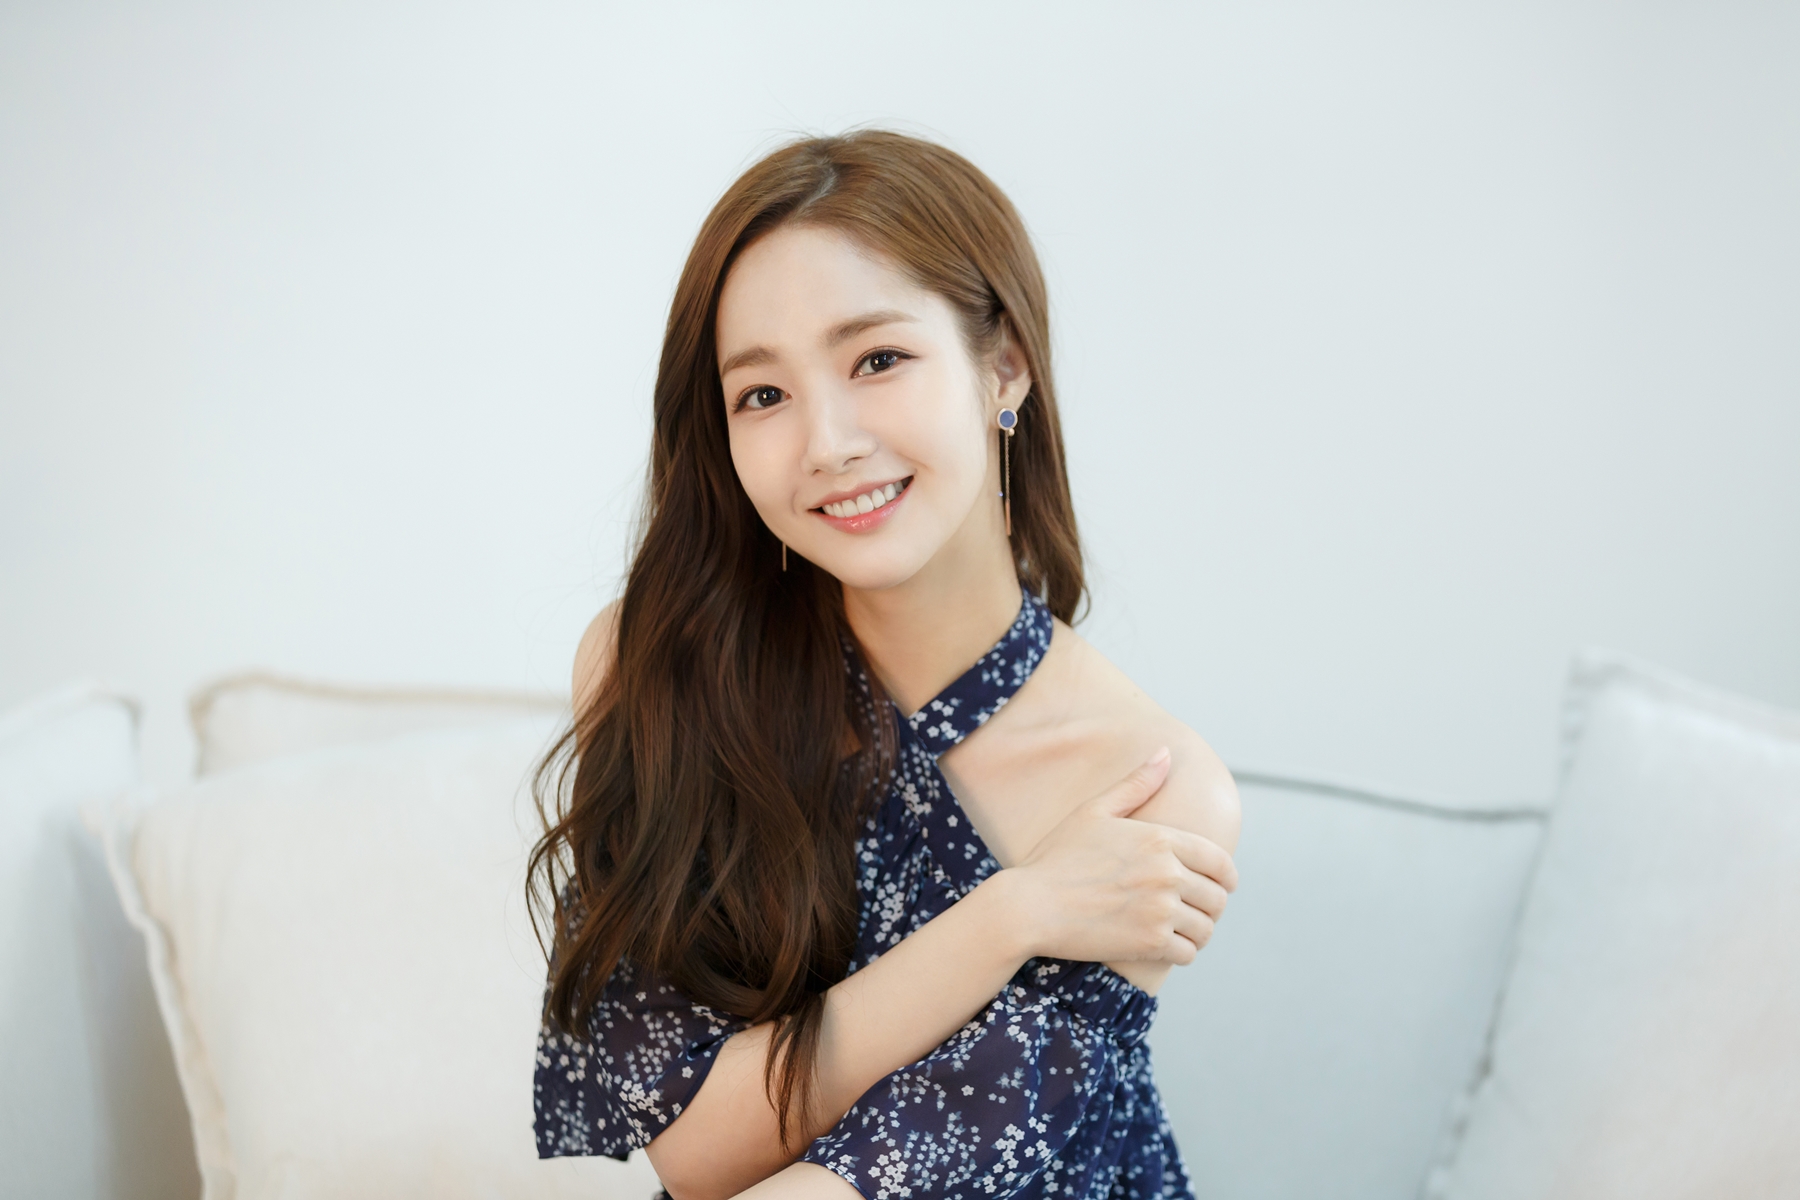 The new Roco Queen was born.Actor Park Min-young (32) played the perfect secretary Kim Mi-so in the TVN tree drama Why Secretary Kim Will Do It, the first romantic comedy top model, and showed his acting skills and announced the birth of a new Roco Queen.Park Min-young, who was destroyed, captivated viewers.Park Min-young said in an interview at the end of Why is Kim Secretary?There are many triangles due to the nature of the genre called Rocco, and there were some points where I was going to do this even when I was transferred to the heroine.I thought it was a character of a foreigner who had a charisma that could overwhelm people while keeping his manners. It was an honor to be able to play a wonderful woman. Park Min-young, who has appeared in City Hunter, Doctor Jean, Gaecheon Line, Remembrance - Sons War, and Seven Days of Queen, has grown into an anticipated female actor, and has been popular with viewers every time, showing his full acting skills through Why Secretary Kim will do that.Of course, before the broadcast Why Secretary Kim would do that, there was also a voice of concern about Park Min-youngs acting transformation on the first Rocco Top Model since his debut.Park Min-young showed more effort and effort to prepare for this reaction.Ironically, they say its strange if Rocco is the first, Park Min-young said, but he said hed been doing it a lot since his debut for twelve years.I wasnt the first person to do it, either. Technically, Ive never had a comedy with it.The approach was similar because romance has always been.I just have a very different atmosphere, so if I do not try, I will put myself in it and I will have a rich expression than when I played in other dramas.I was surprised to see her face, and it was a strange experience because I thought she was looking for another face.Park Min-young, at the very beginning, showed Kim Mi-so, the perfect secretary who is the only person who can control Lee Yeongjun (Park Seo-joon), the vice chairman, and boasted professional work, and Kim Mi-so, who was unable to have a love affair because he did not have time, at the same time.Later, he went to Lee Yeongjun, who was suffering from trauma, courageously, and exploded Minyoung Crush, realizing that what he wanted to do best was secretary, and became a lovely Wannabe who loved himself and was active in everything.The romance scene, played by Park Seo-joon Park Min-young, painted the house theater with excitement and tension.The romance Kiss god scenes such as Kiss Mill You, Kiss God, Kiss god, Kiss god, front, and wedding god were poured out.Park Min-young said, I am a Roco newborn. Rocco thought that there were so many Kiss gods.I thought there were a lot of Kiss gods after the end of the work, and I thought Rocco was the first, and this was all it was.I had a lot of meetings to make you feel different every time. I tried a lot to look pretty.I think there are a lot of good scenes thanks to the director of the film, the director of the lighting.  (Continue on Interview 2)